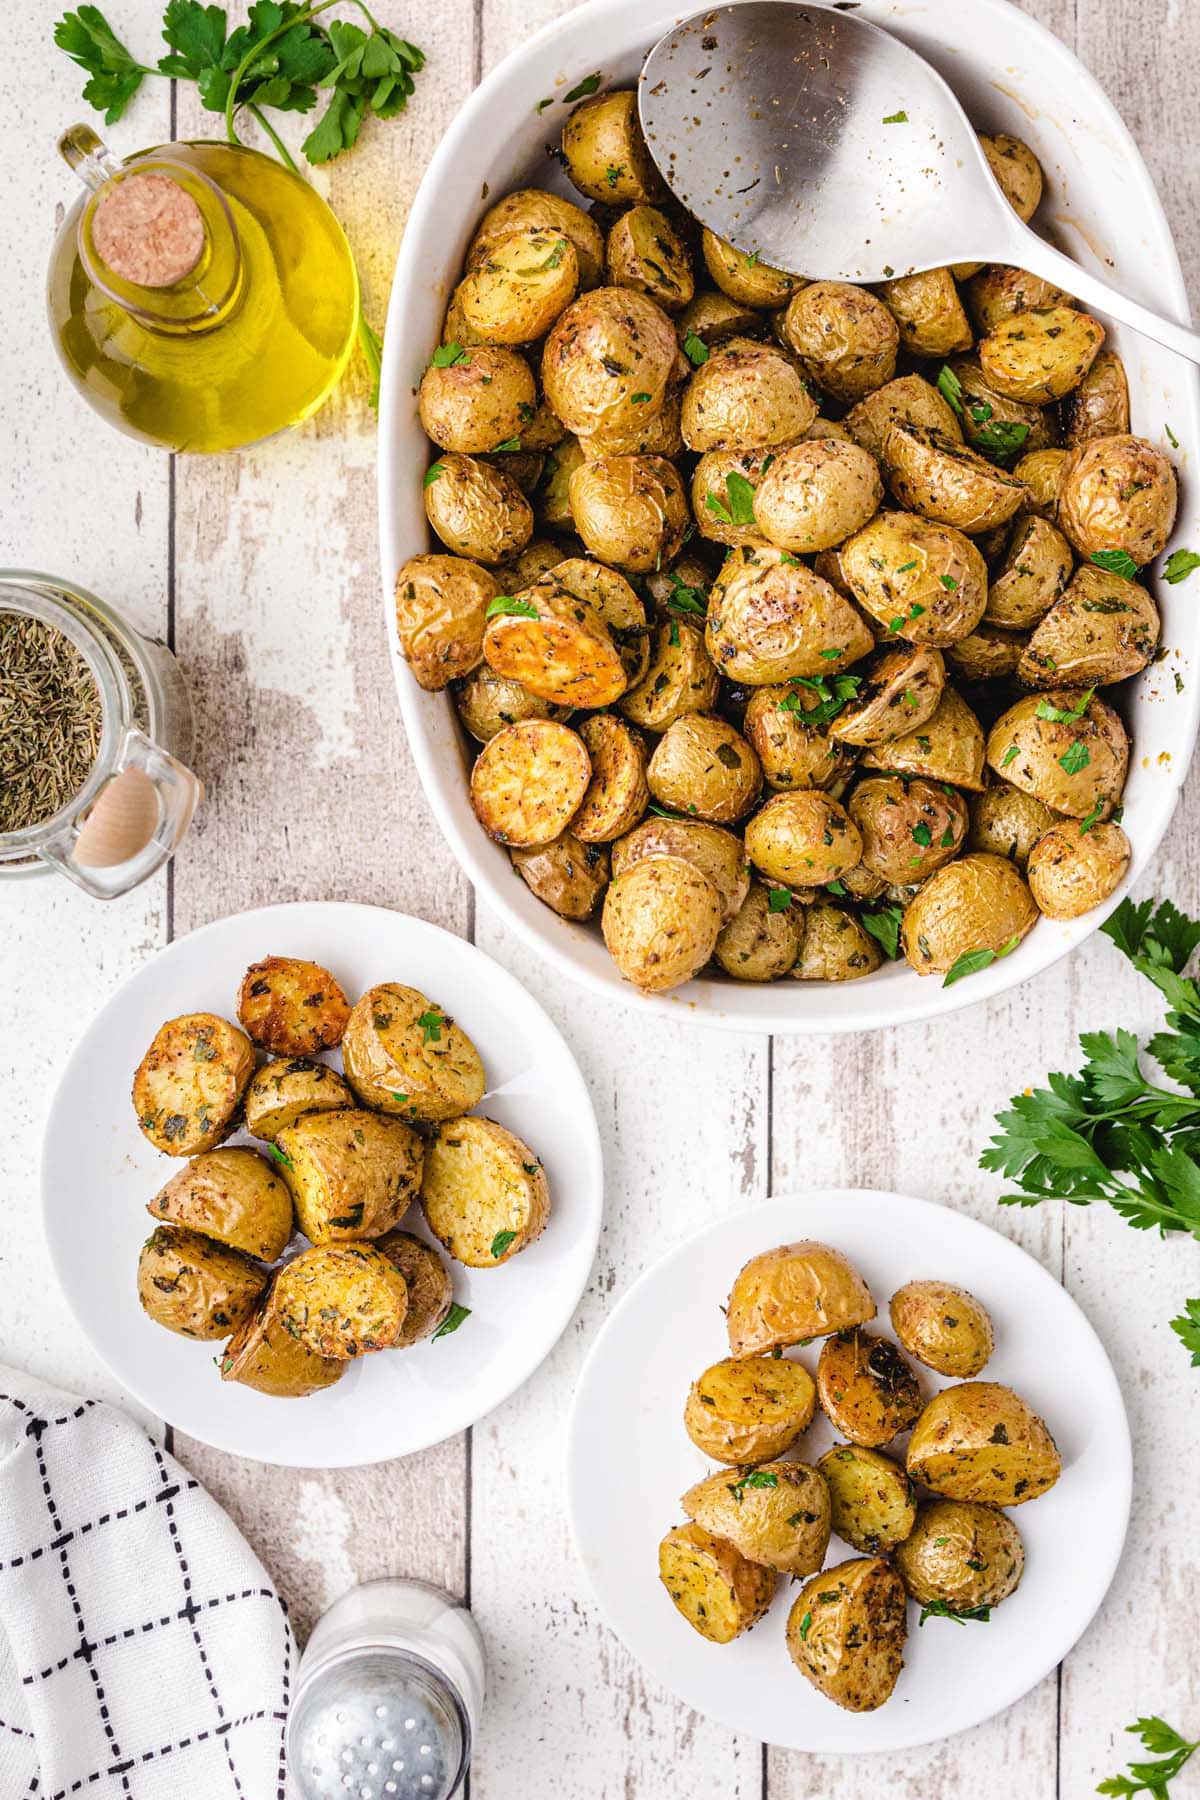 roasted potatoes serve in 2 plates